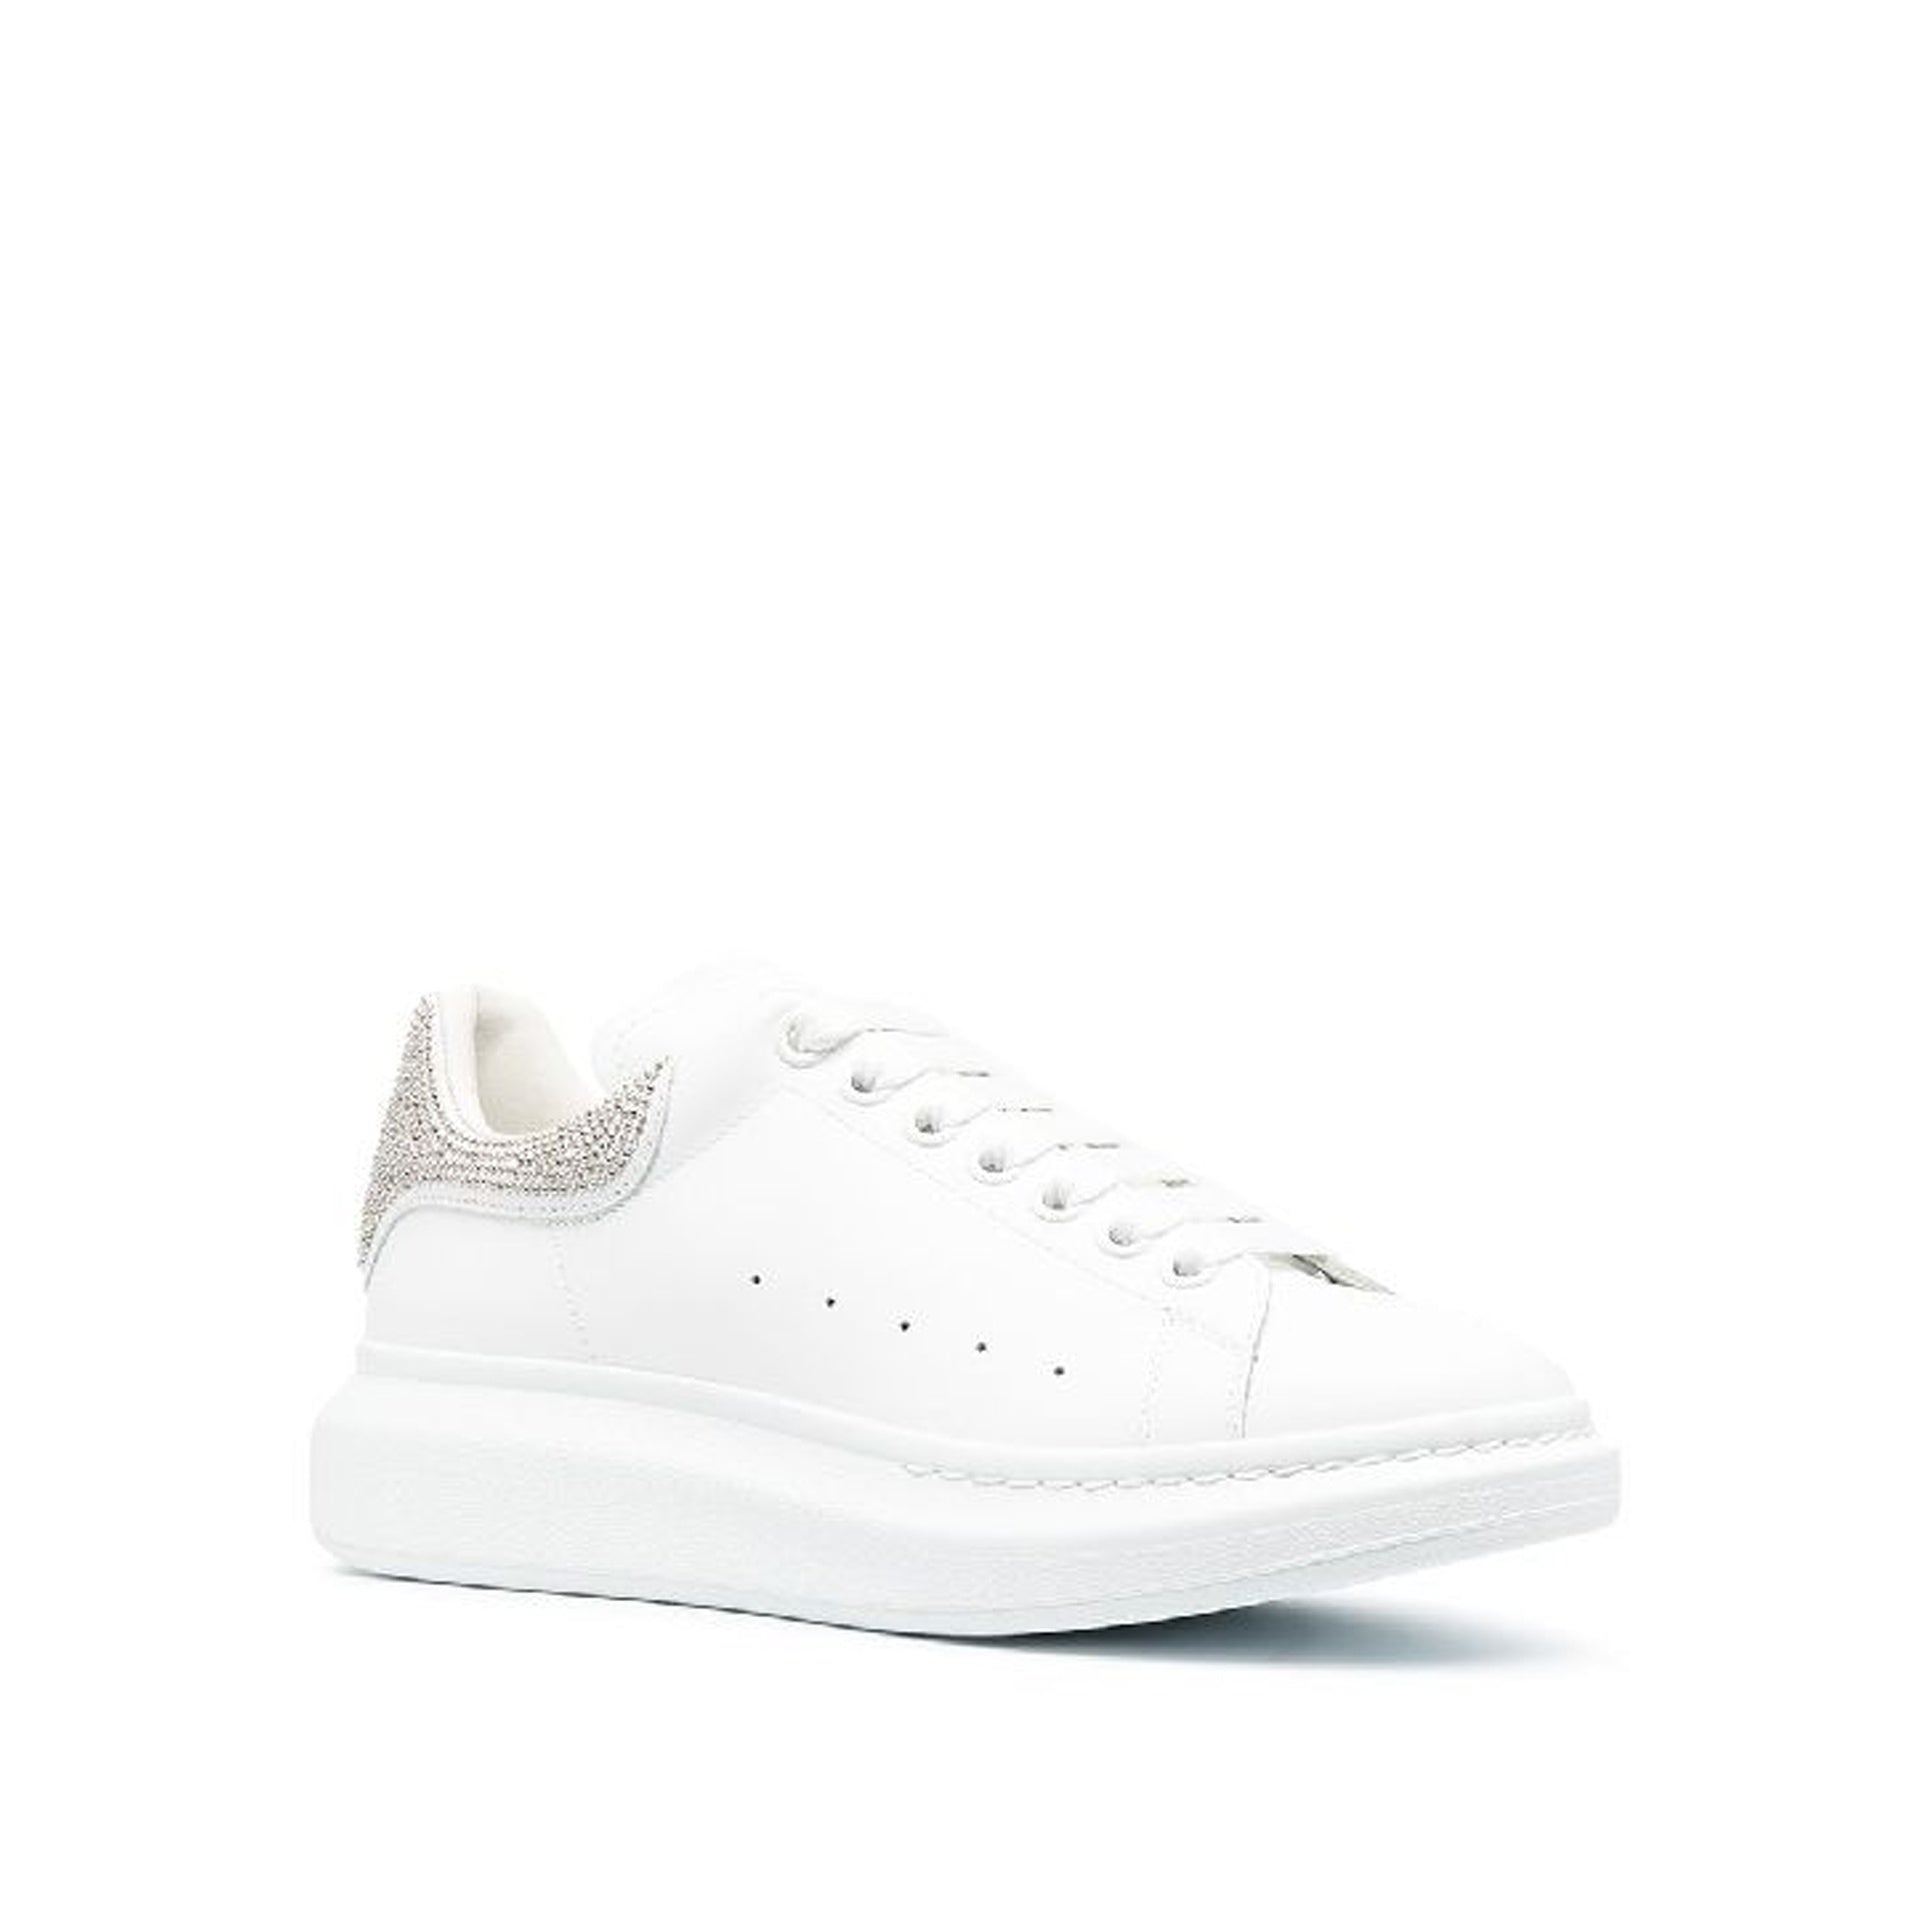 ALEXANDER-MCQUEEN-OUTLET-SALE-Alexander-McQueen-Studded-Oversized-Sneakers-Sneakers-WHITE-49-ARCHIVE-COLLECTION-2.jpg